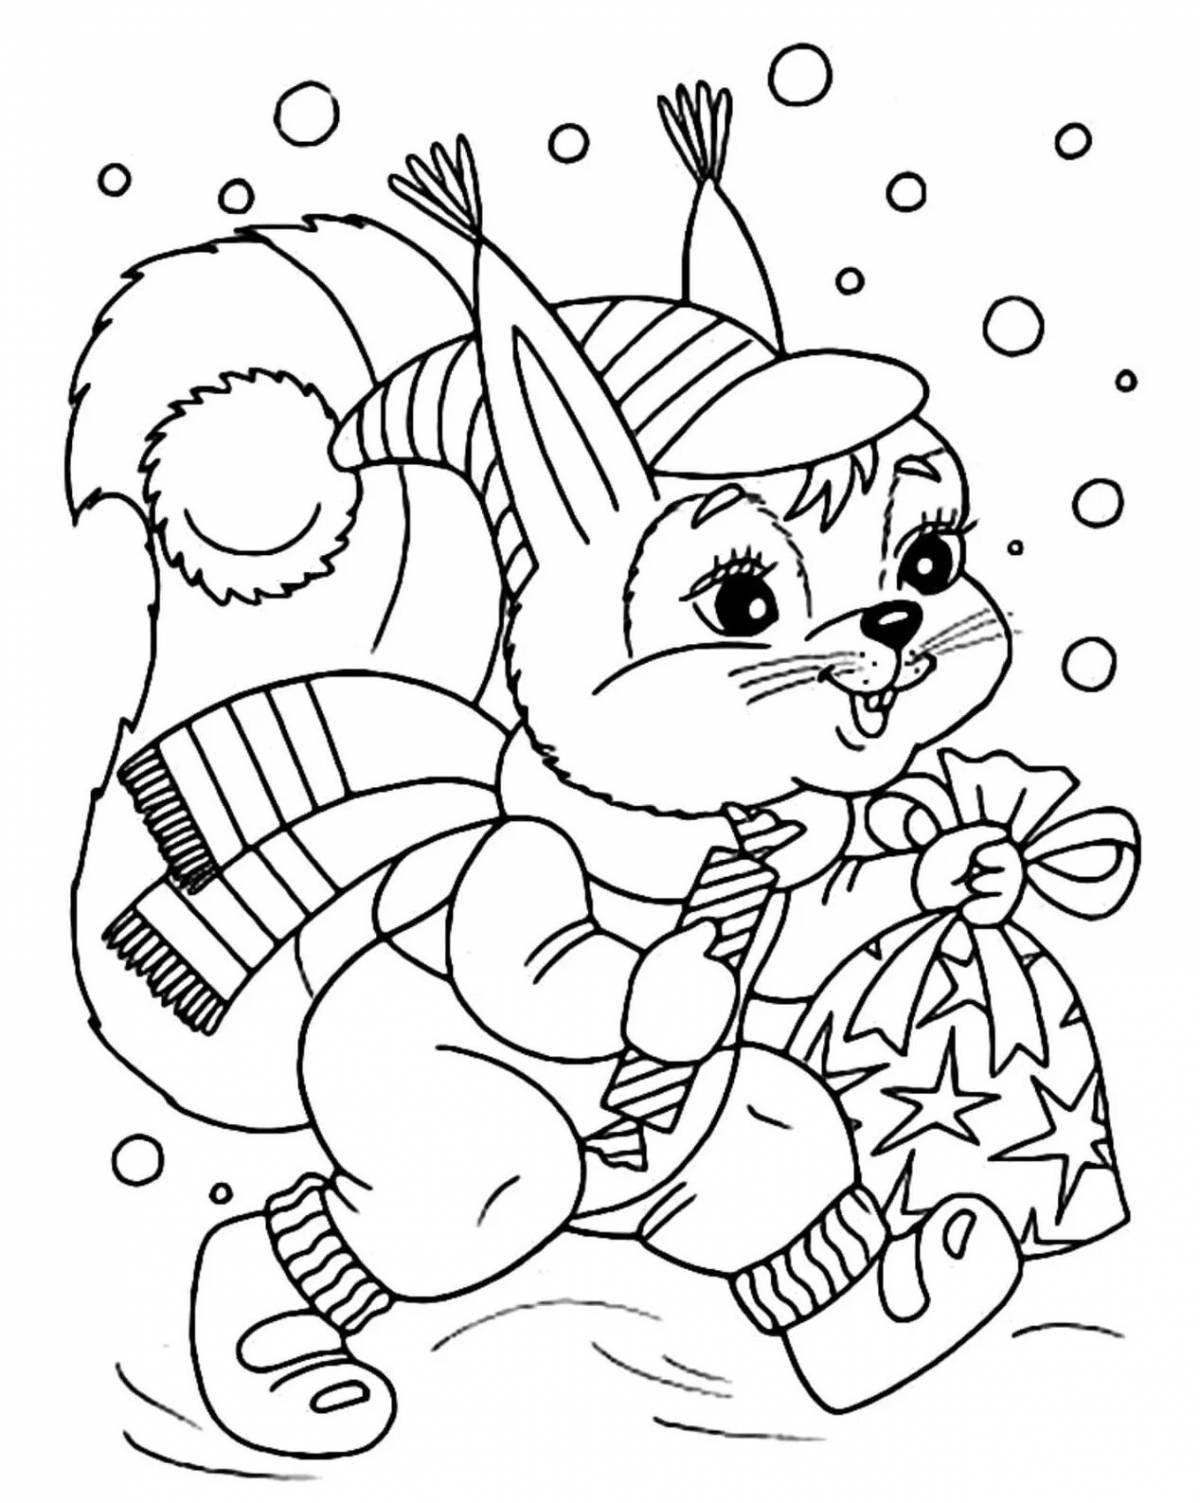 Loving bunny coloring book with a gift